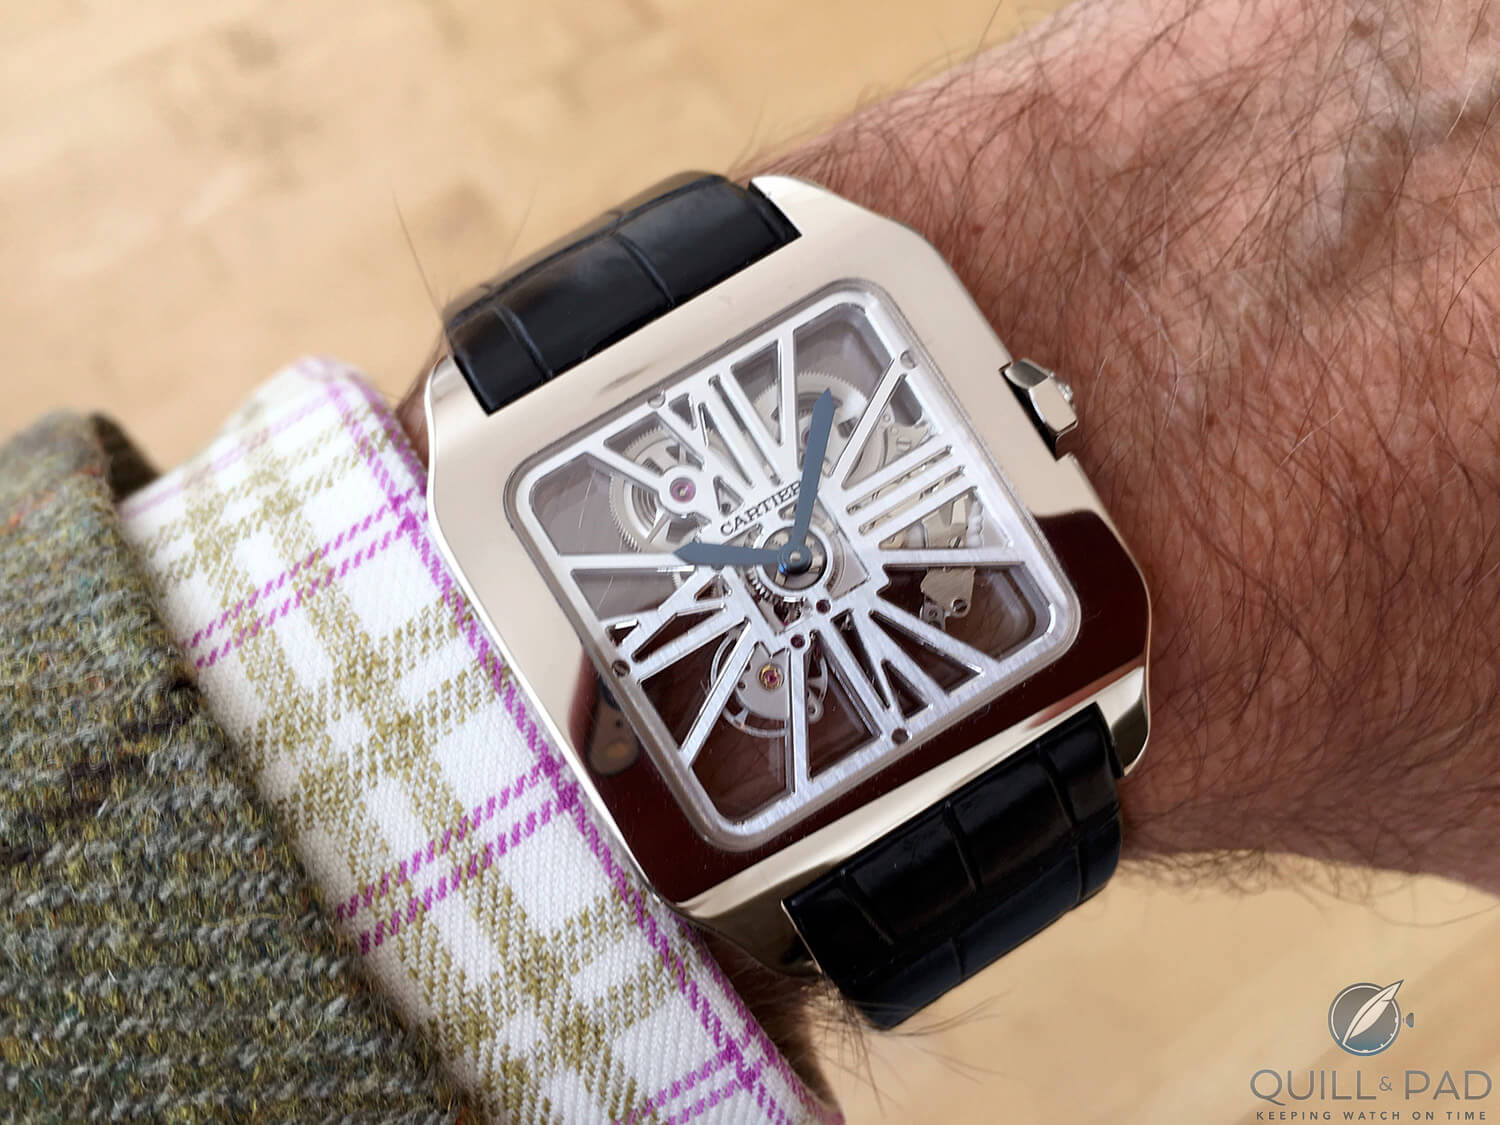 Cartier Santos Dumont Squelette from 2010 on the wrist (photo courtesy George Cramer)